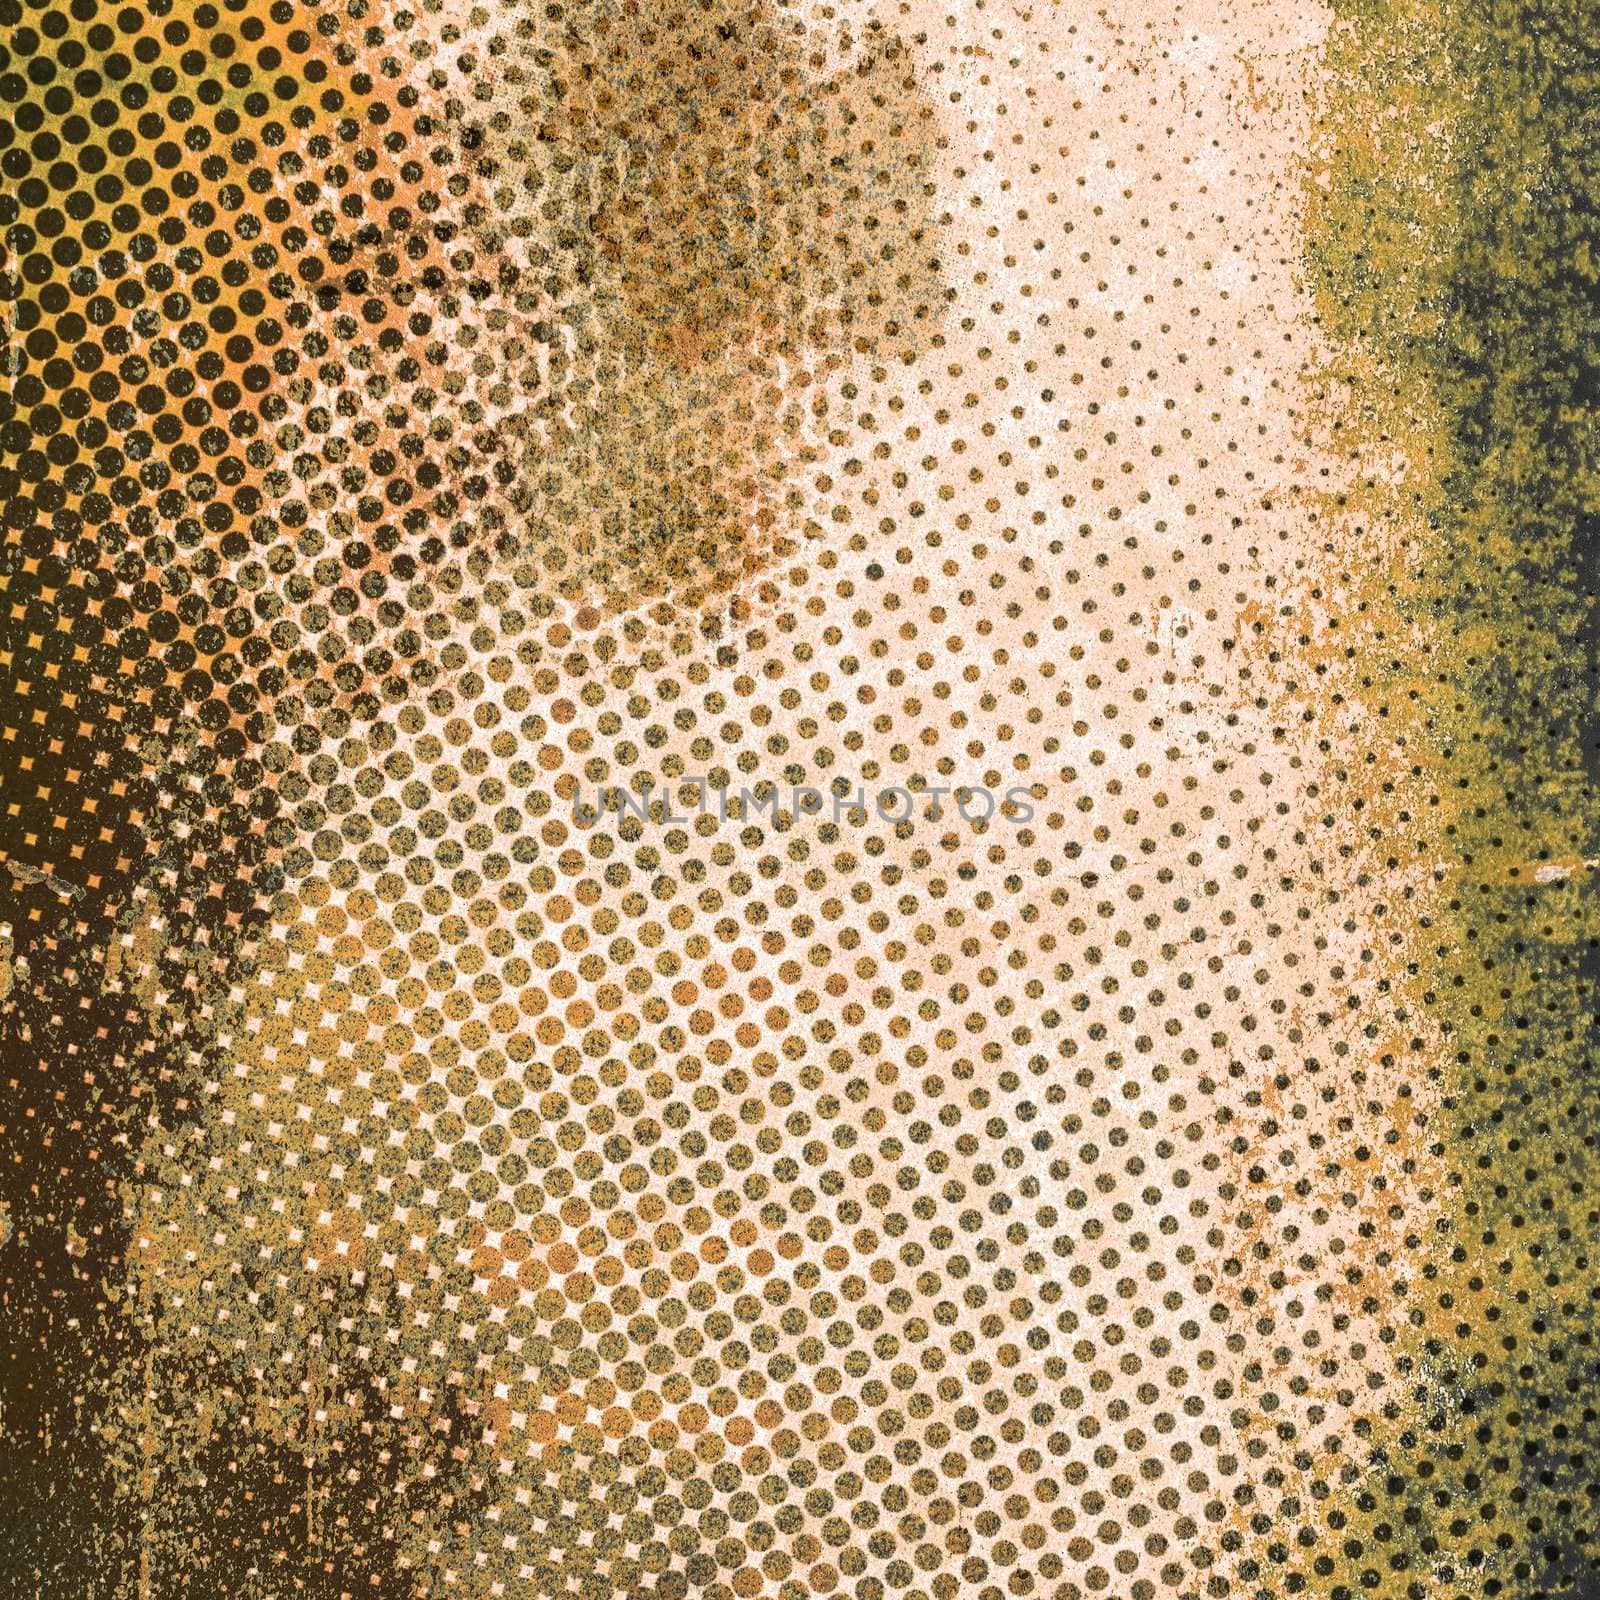 Abstract grunge gradient halftone by jeremywhat